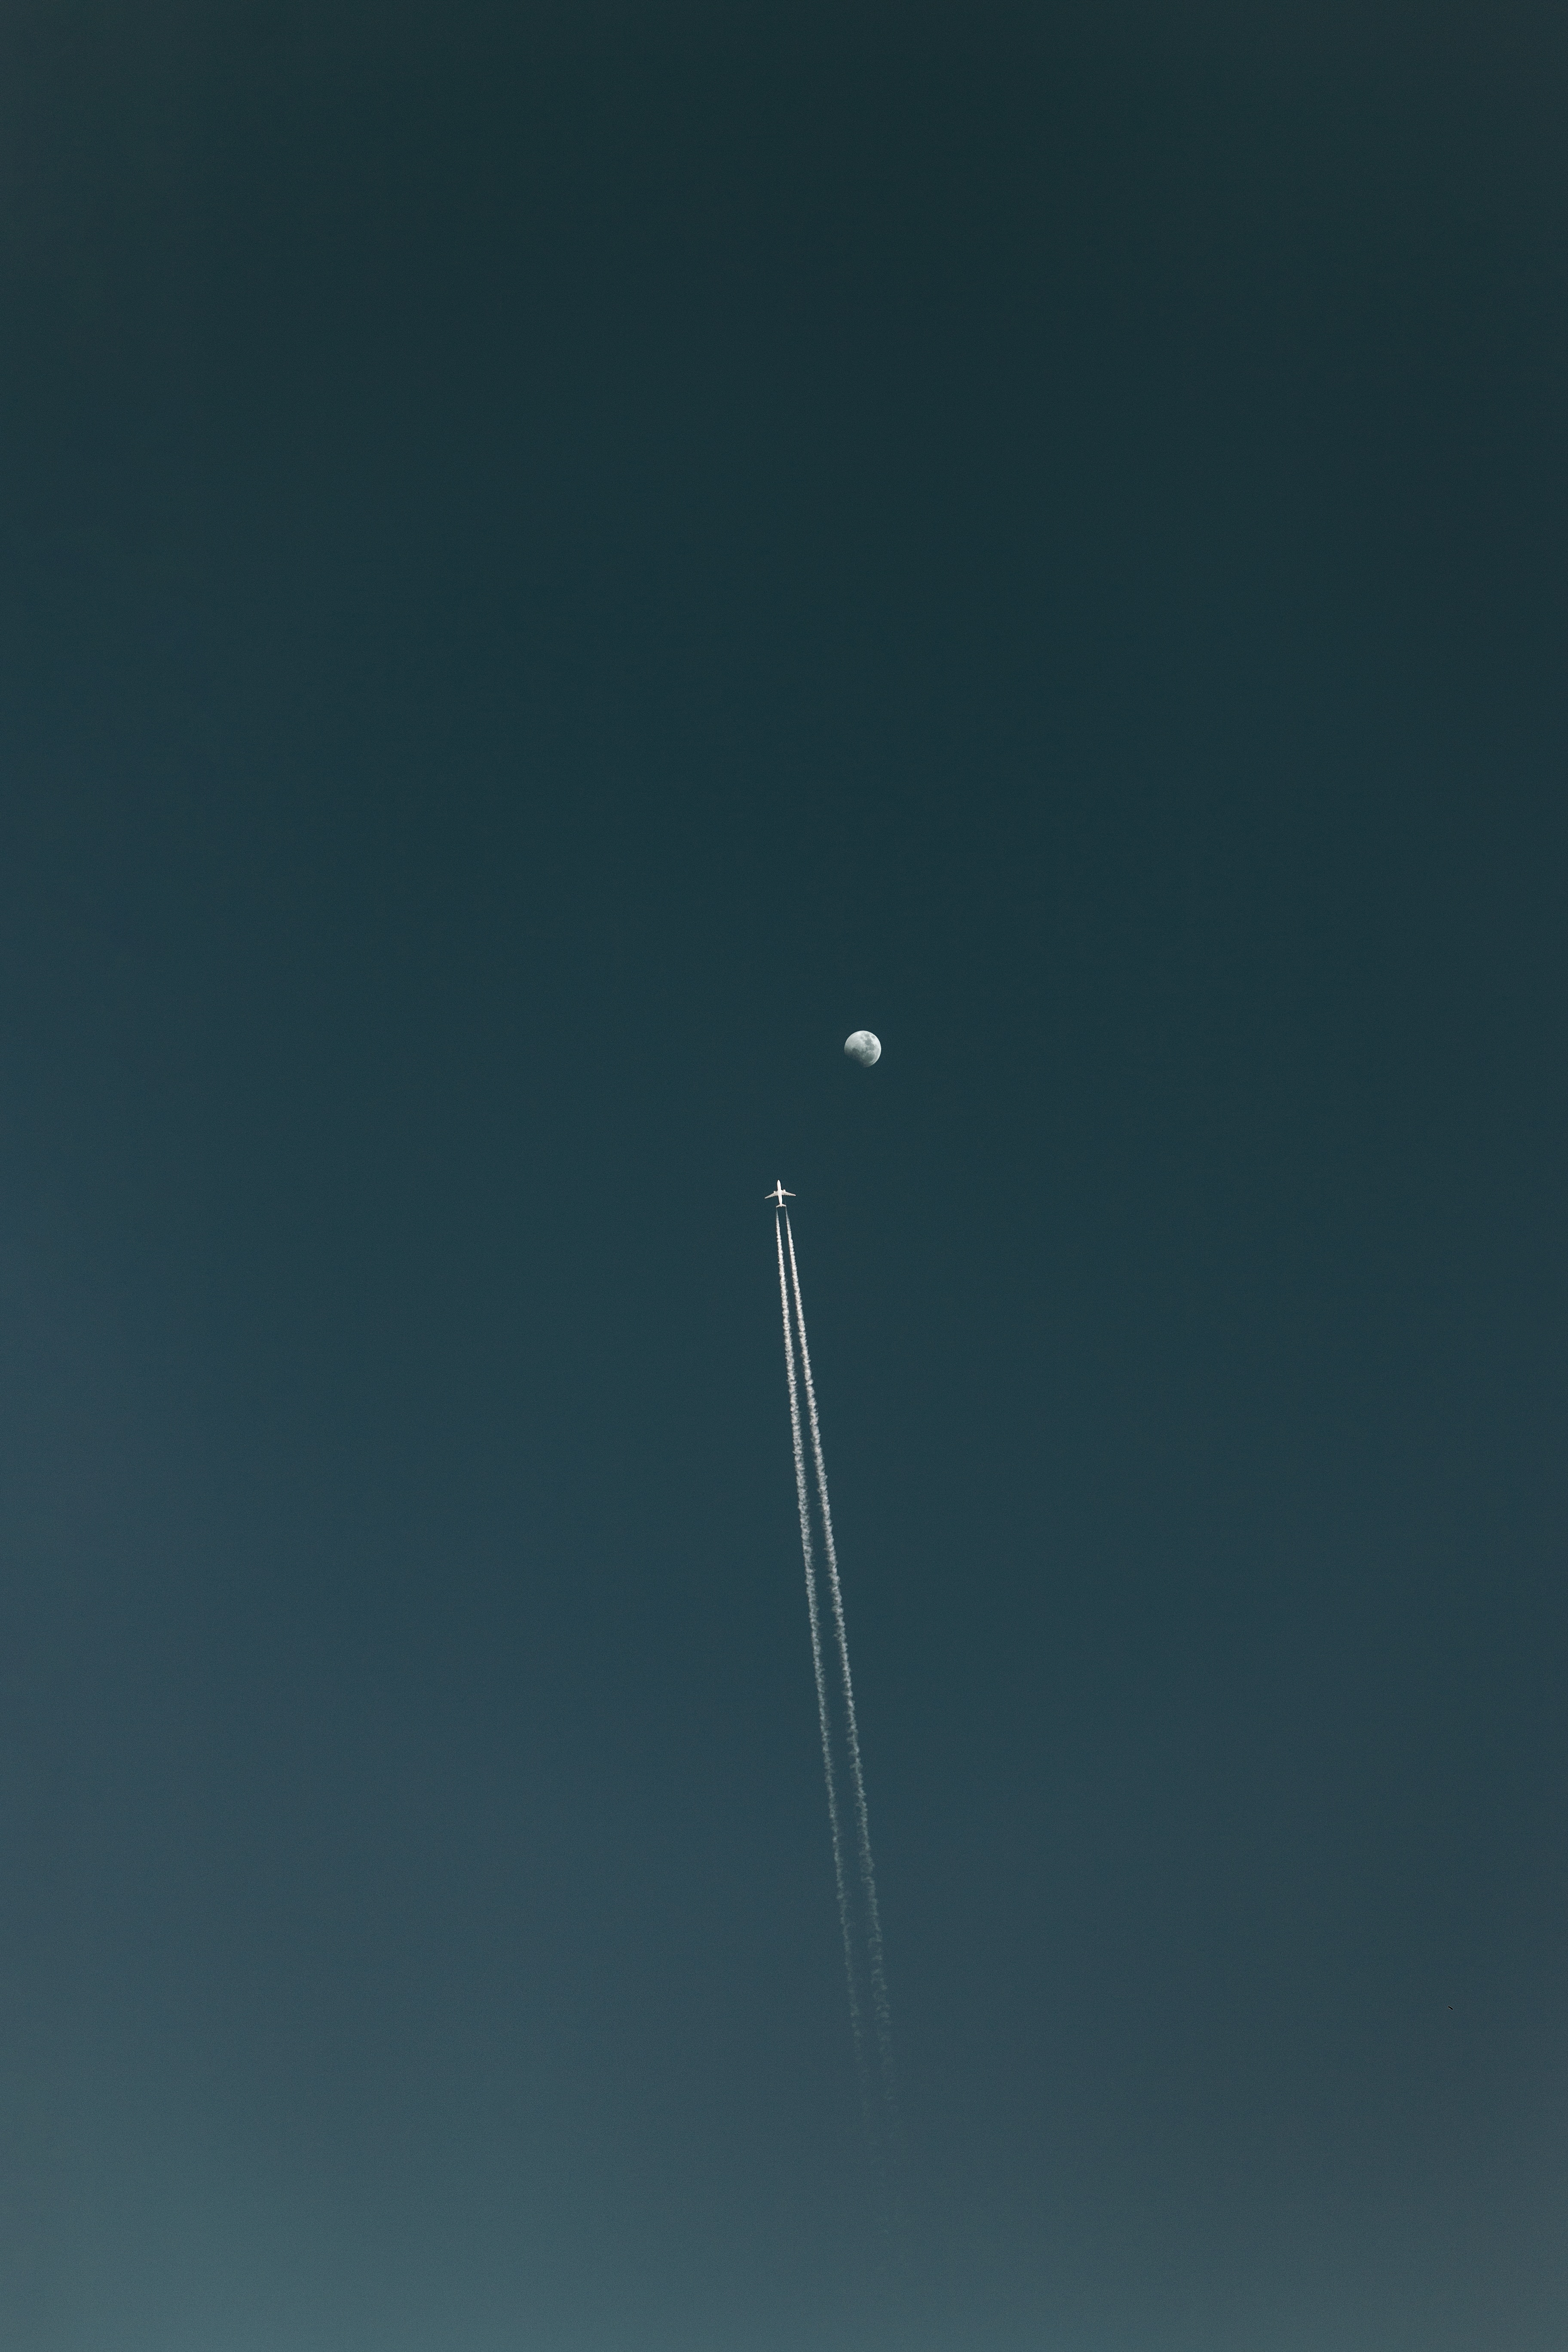 General 3648x5472 sky airplane clear sky Moon vehicle contrails aircraft